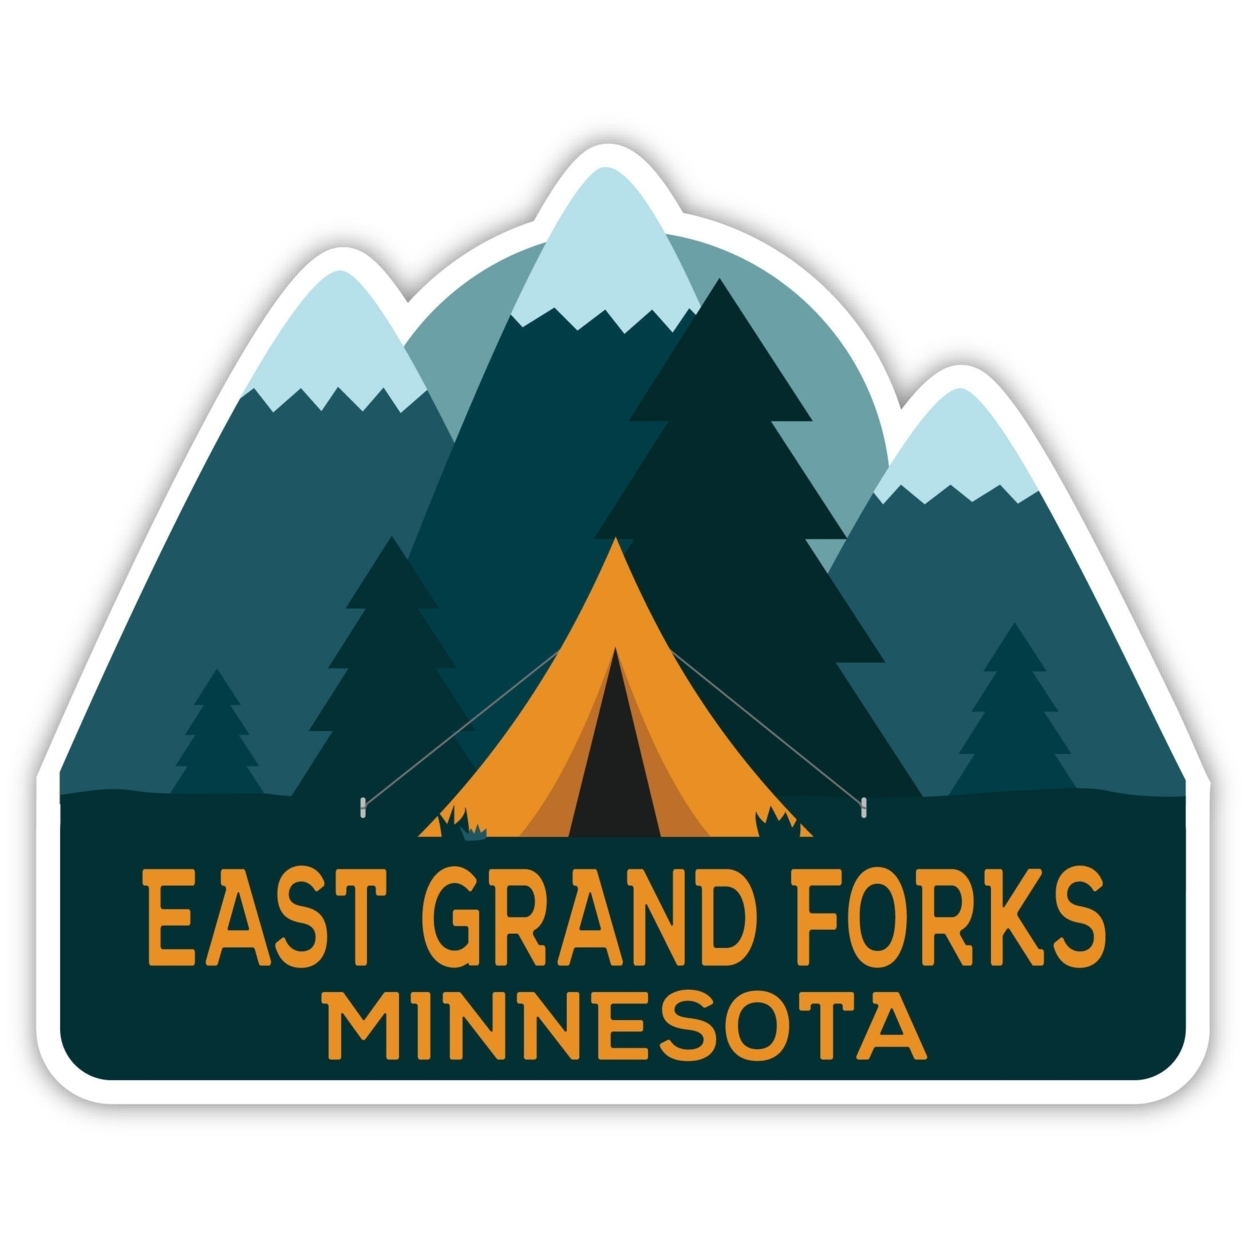 East Grand Forks Minnesota Souvenir Decorative Stickers (Choose Theme And Size) - 4-Pack, 2-Inch, Tent